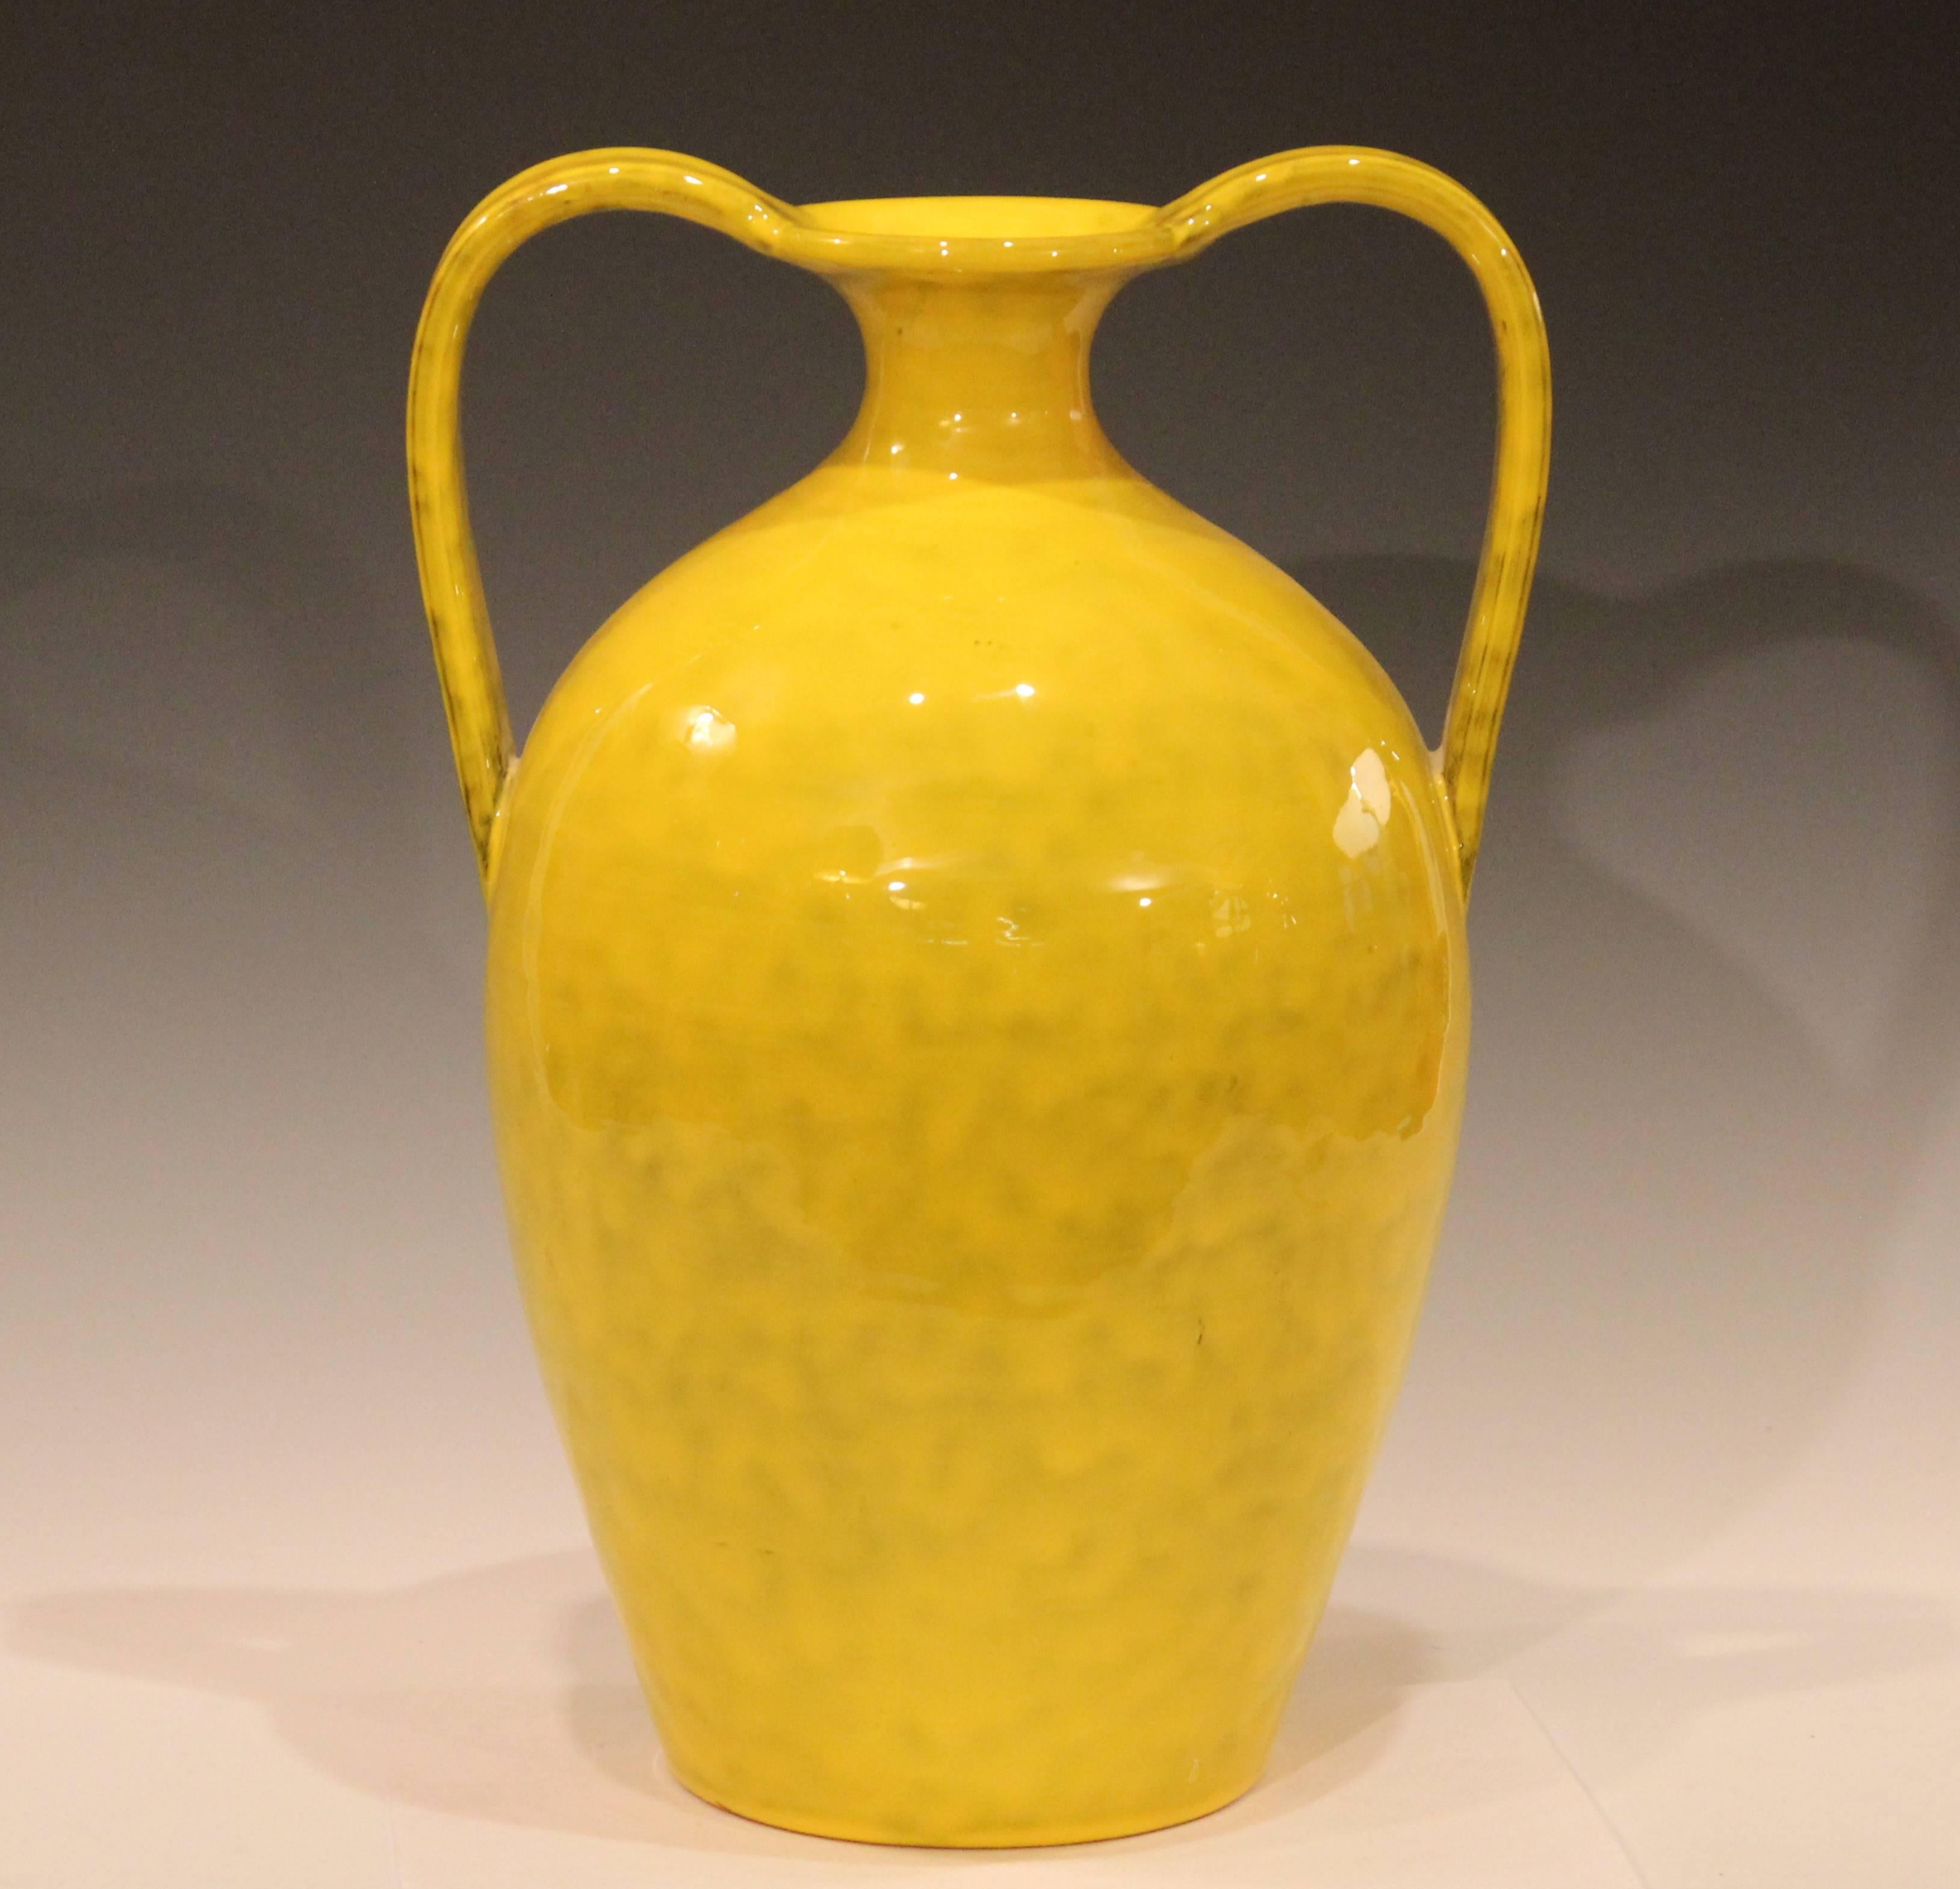 Big 1960s hand-turned Italian pottery vase in classical form with electric mottled yellow glaze for Rosenthal-Netter. Attributed to Italica Ars. With original export and RN labels. 15